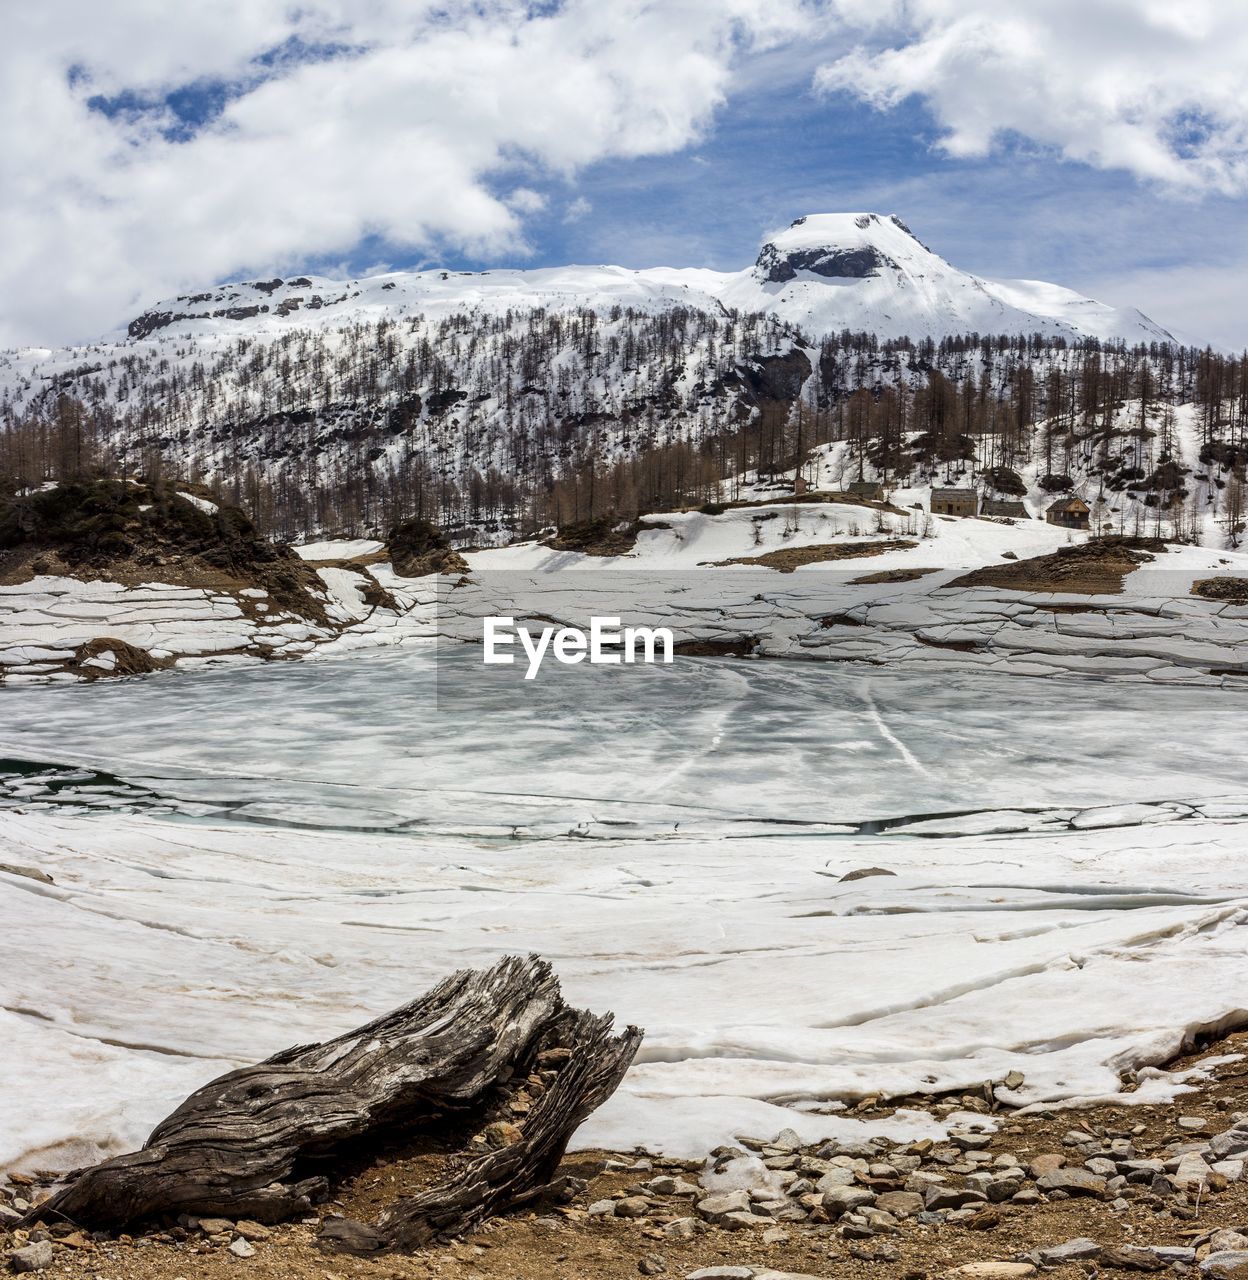 Frozen lake by snowcapped mountains against cloudy sky